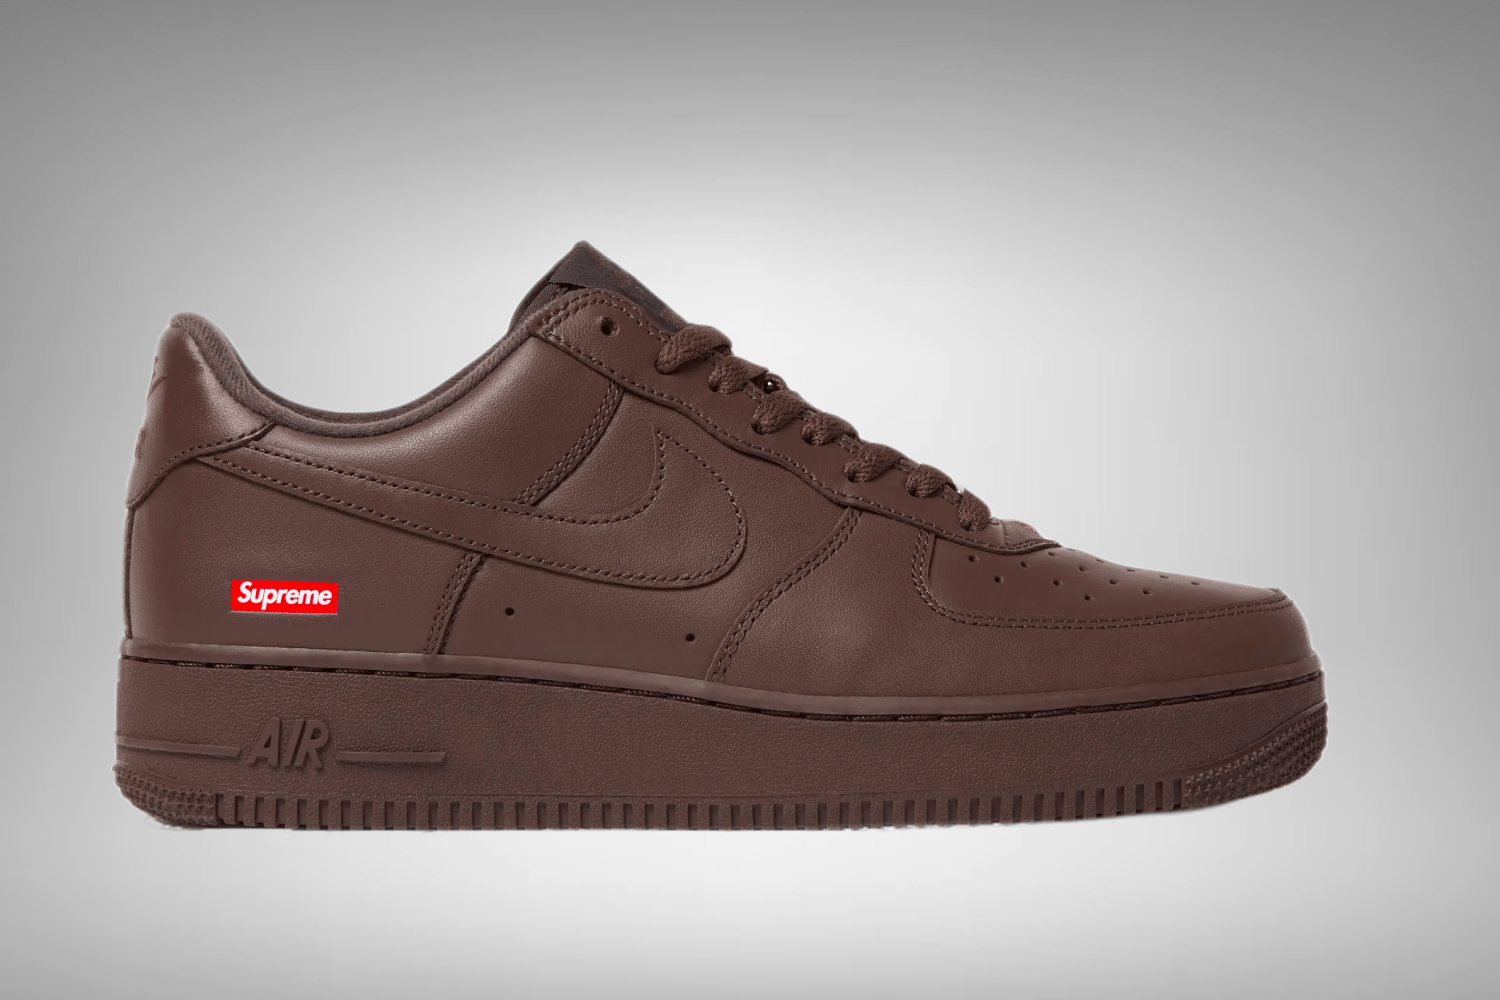 Supreme x Nike Air Force 'Baroque Brown' release